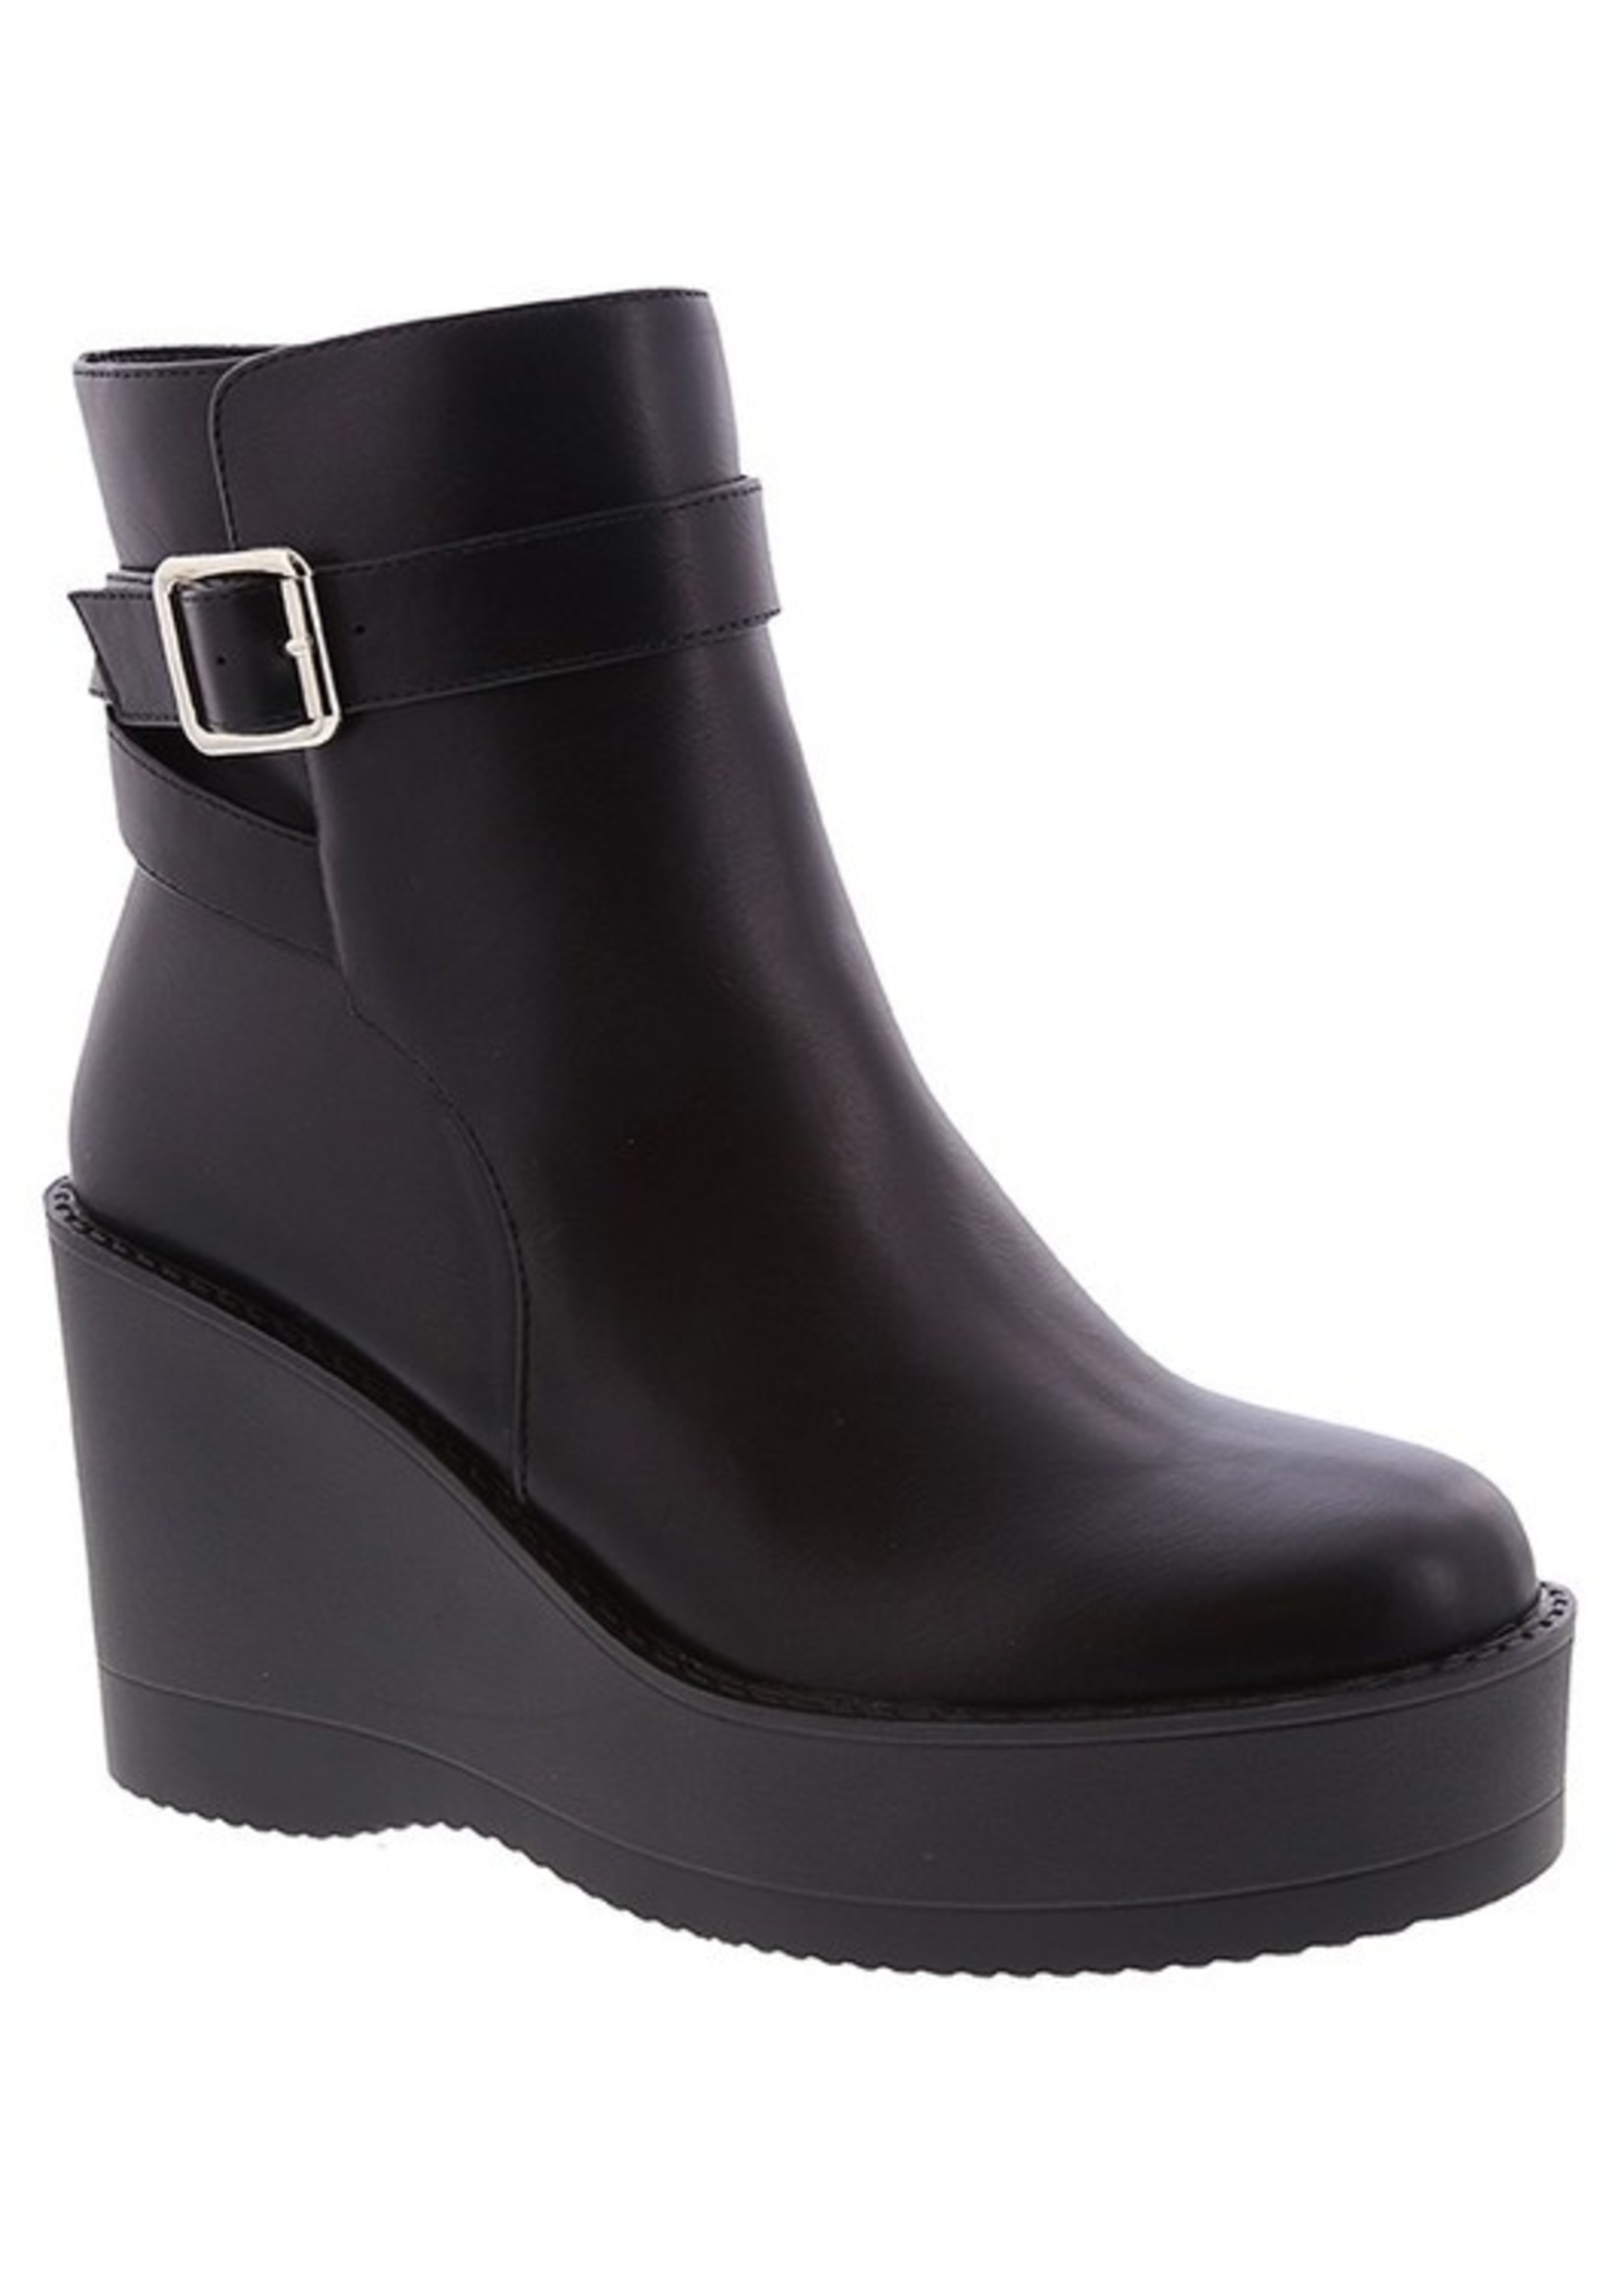 Wedge boot  2 colors